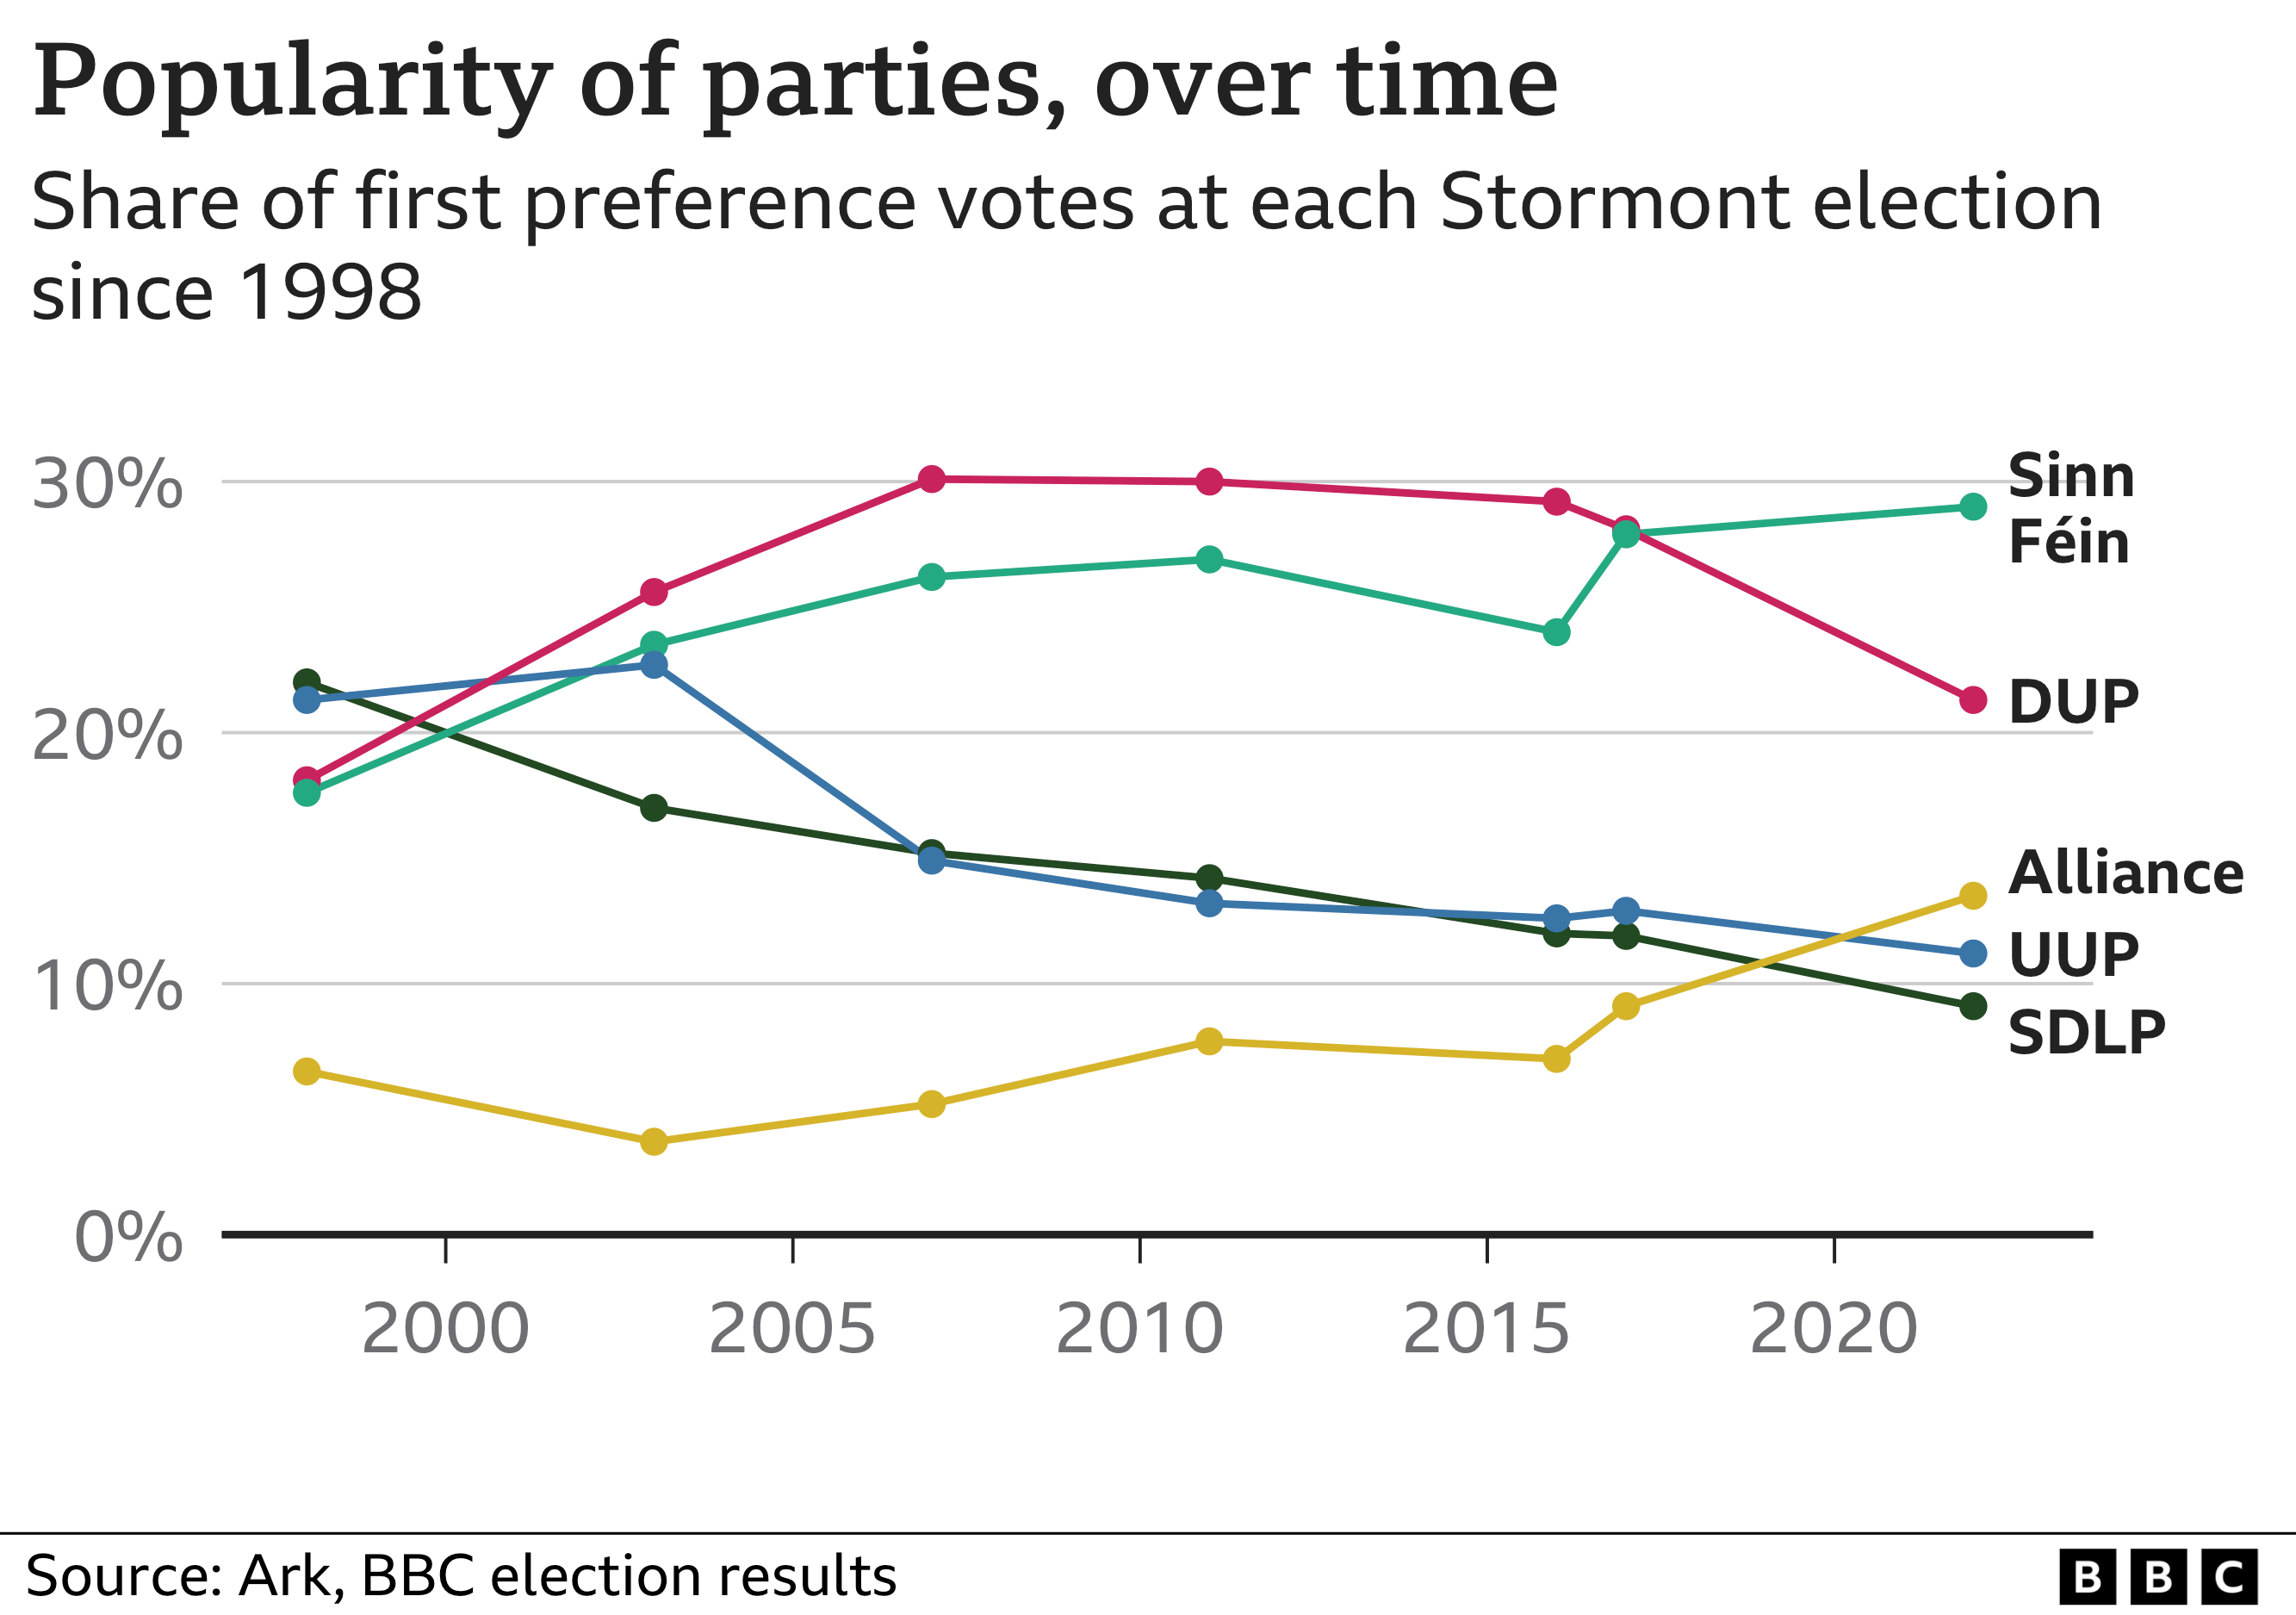 NI election results 2022 The assembly poll in maps and charts BBC News